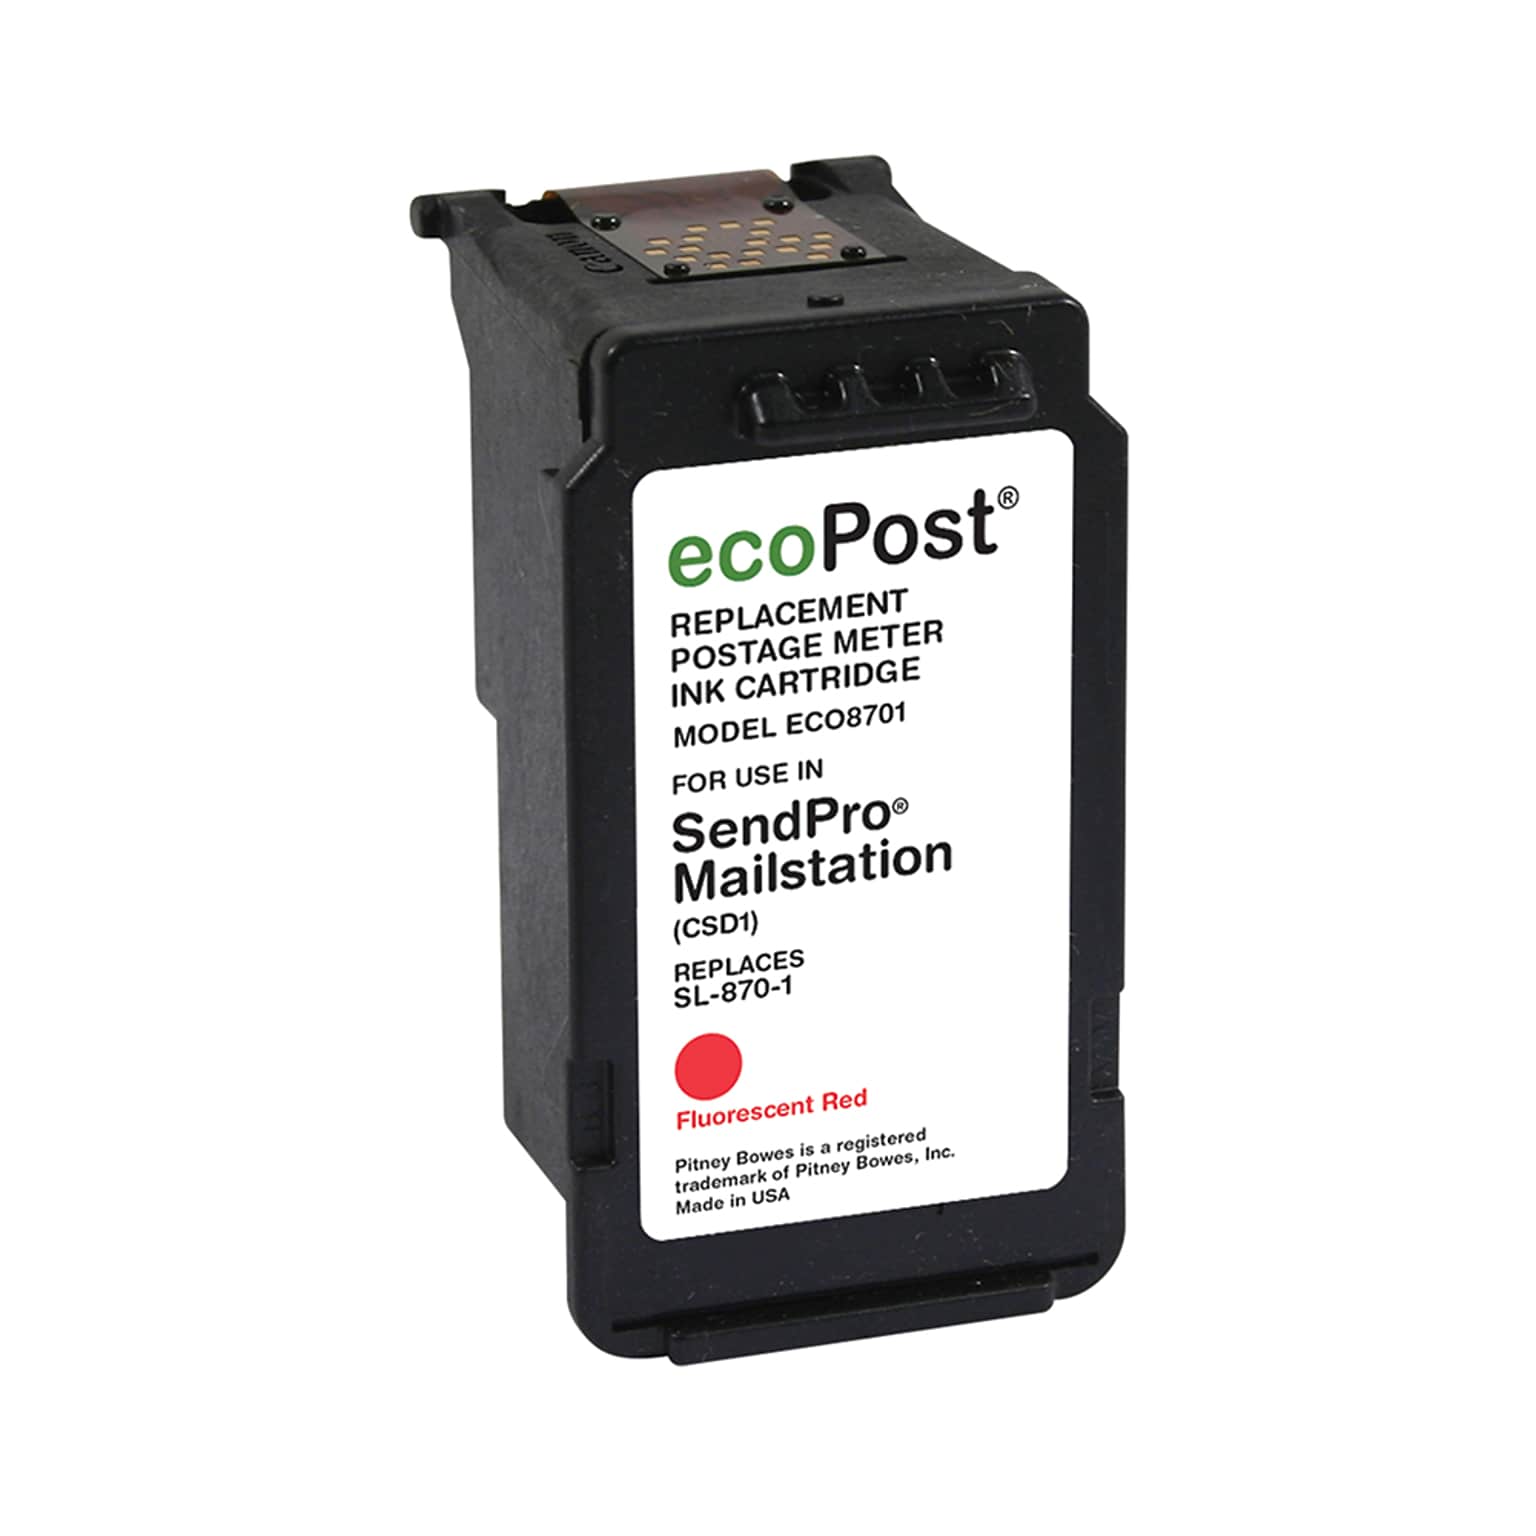 EcoPost Replacement Ink Cartridge for Pitney BowesSL-870-1 Postage Meter (QULECO8701D)